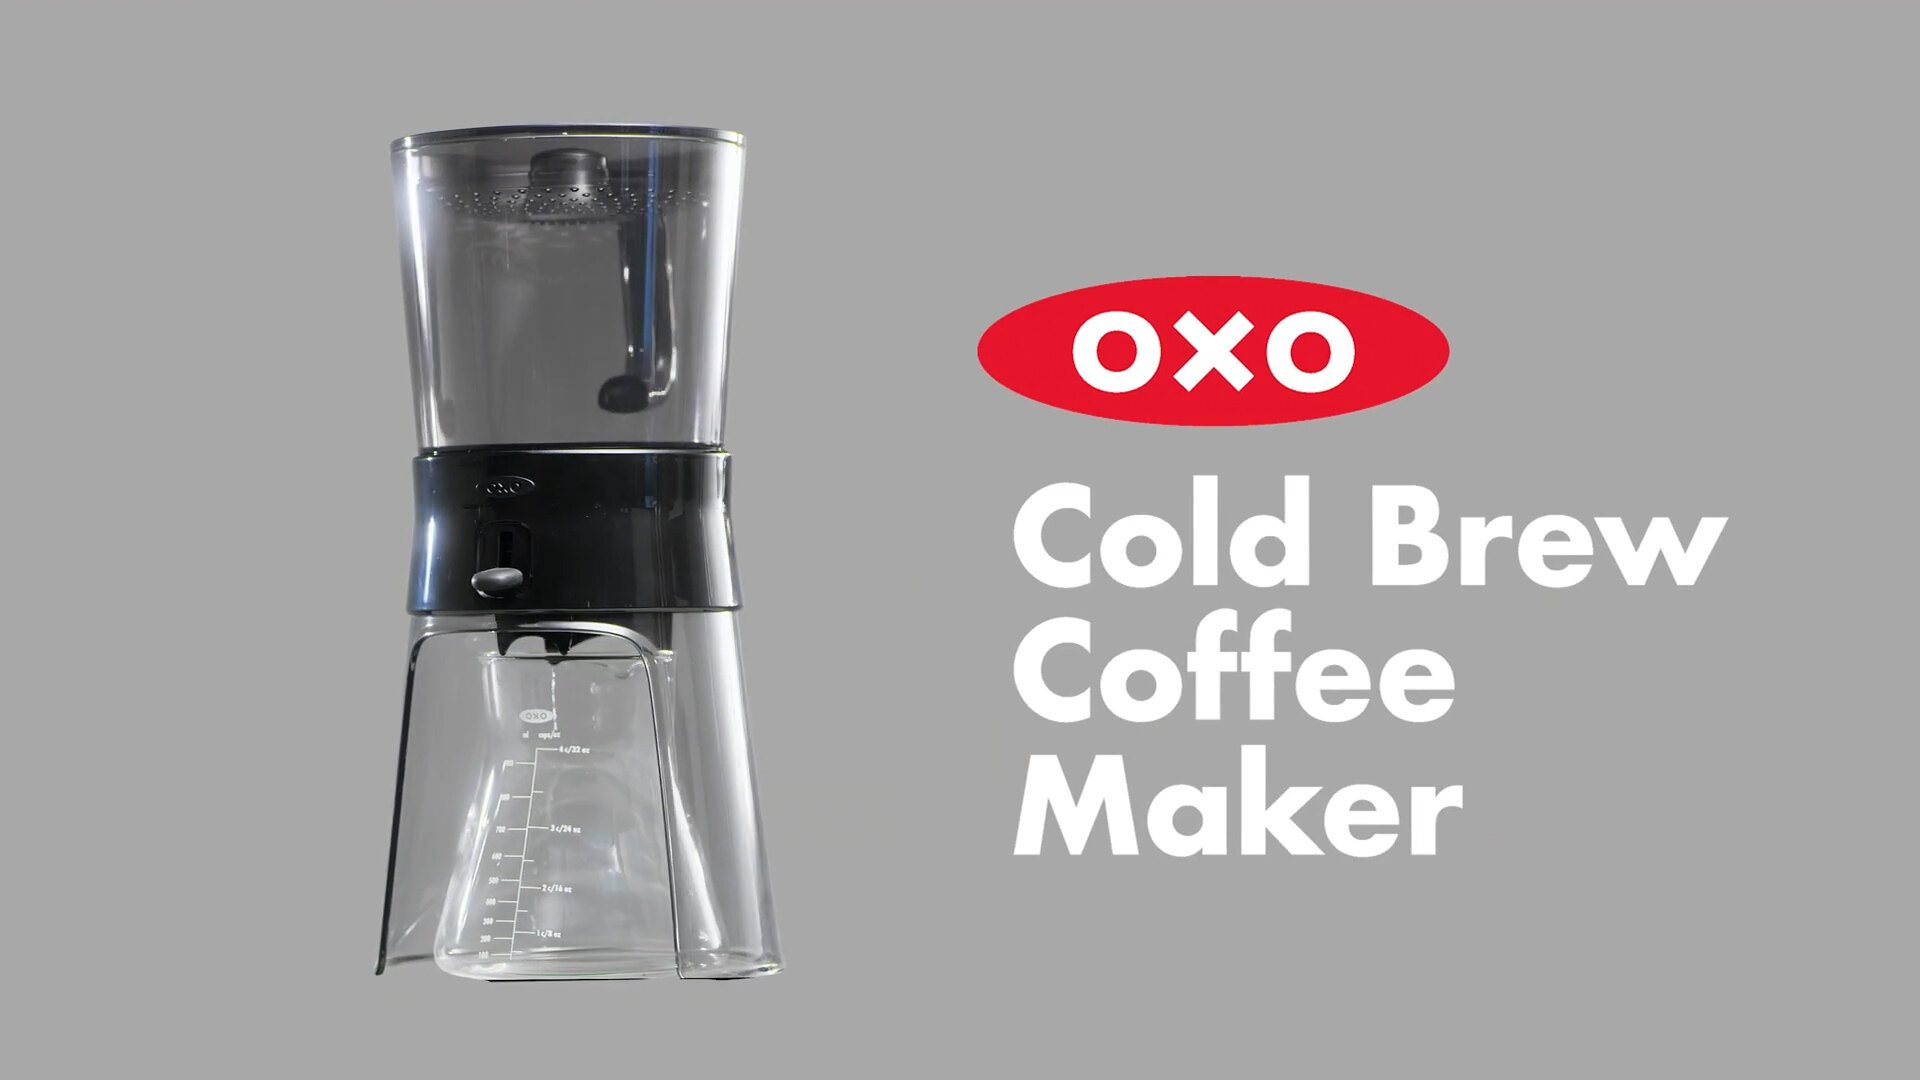 Good Grips 32 Oz Cold Brew Coffee Maker, OXO